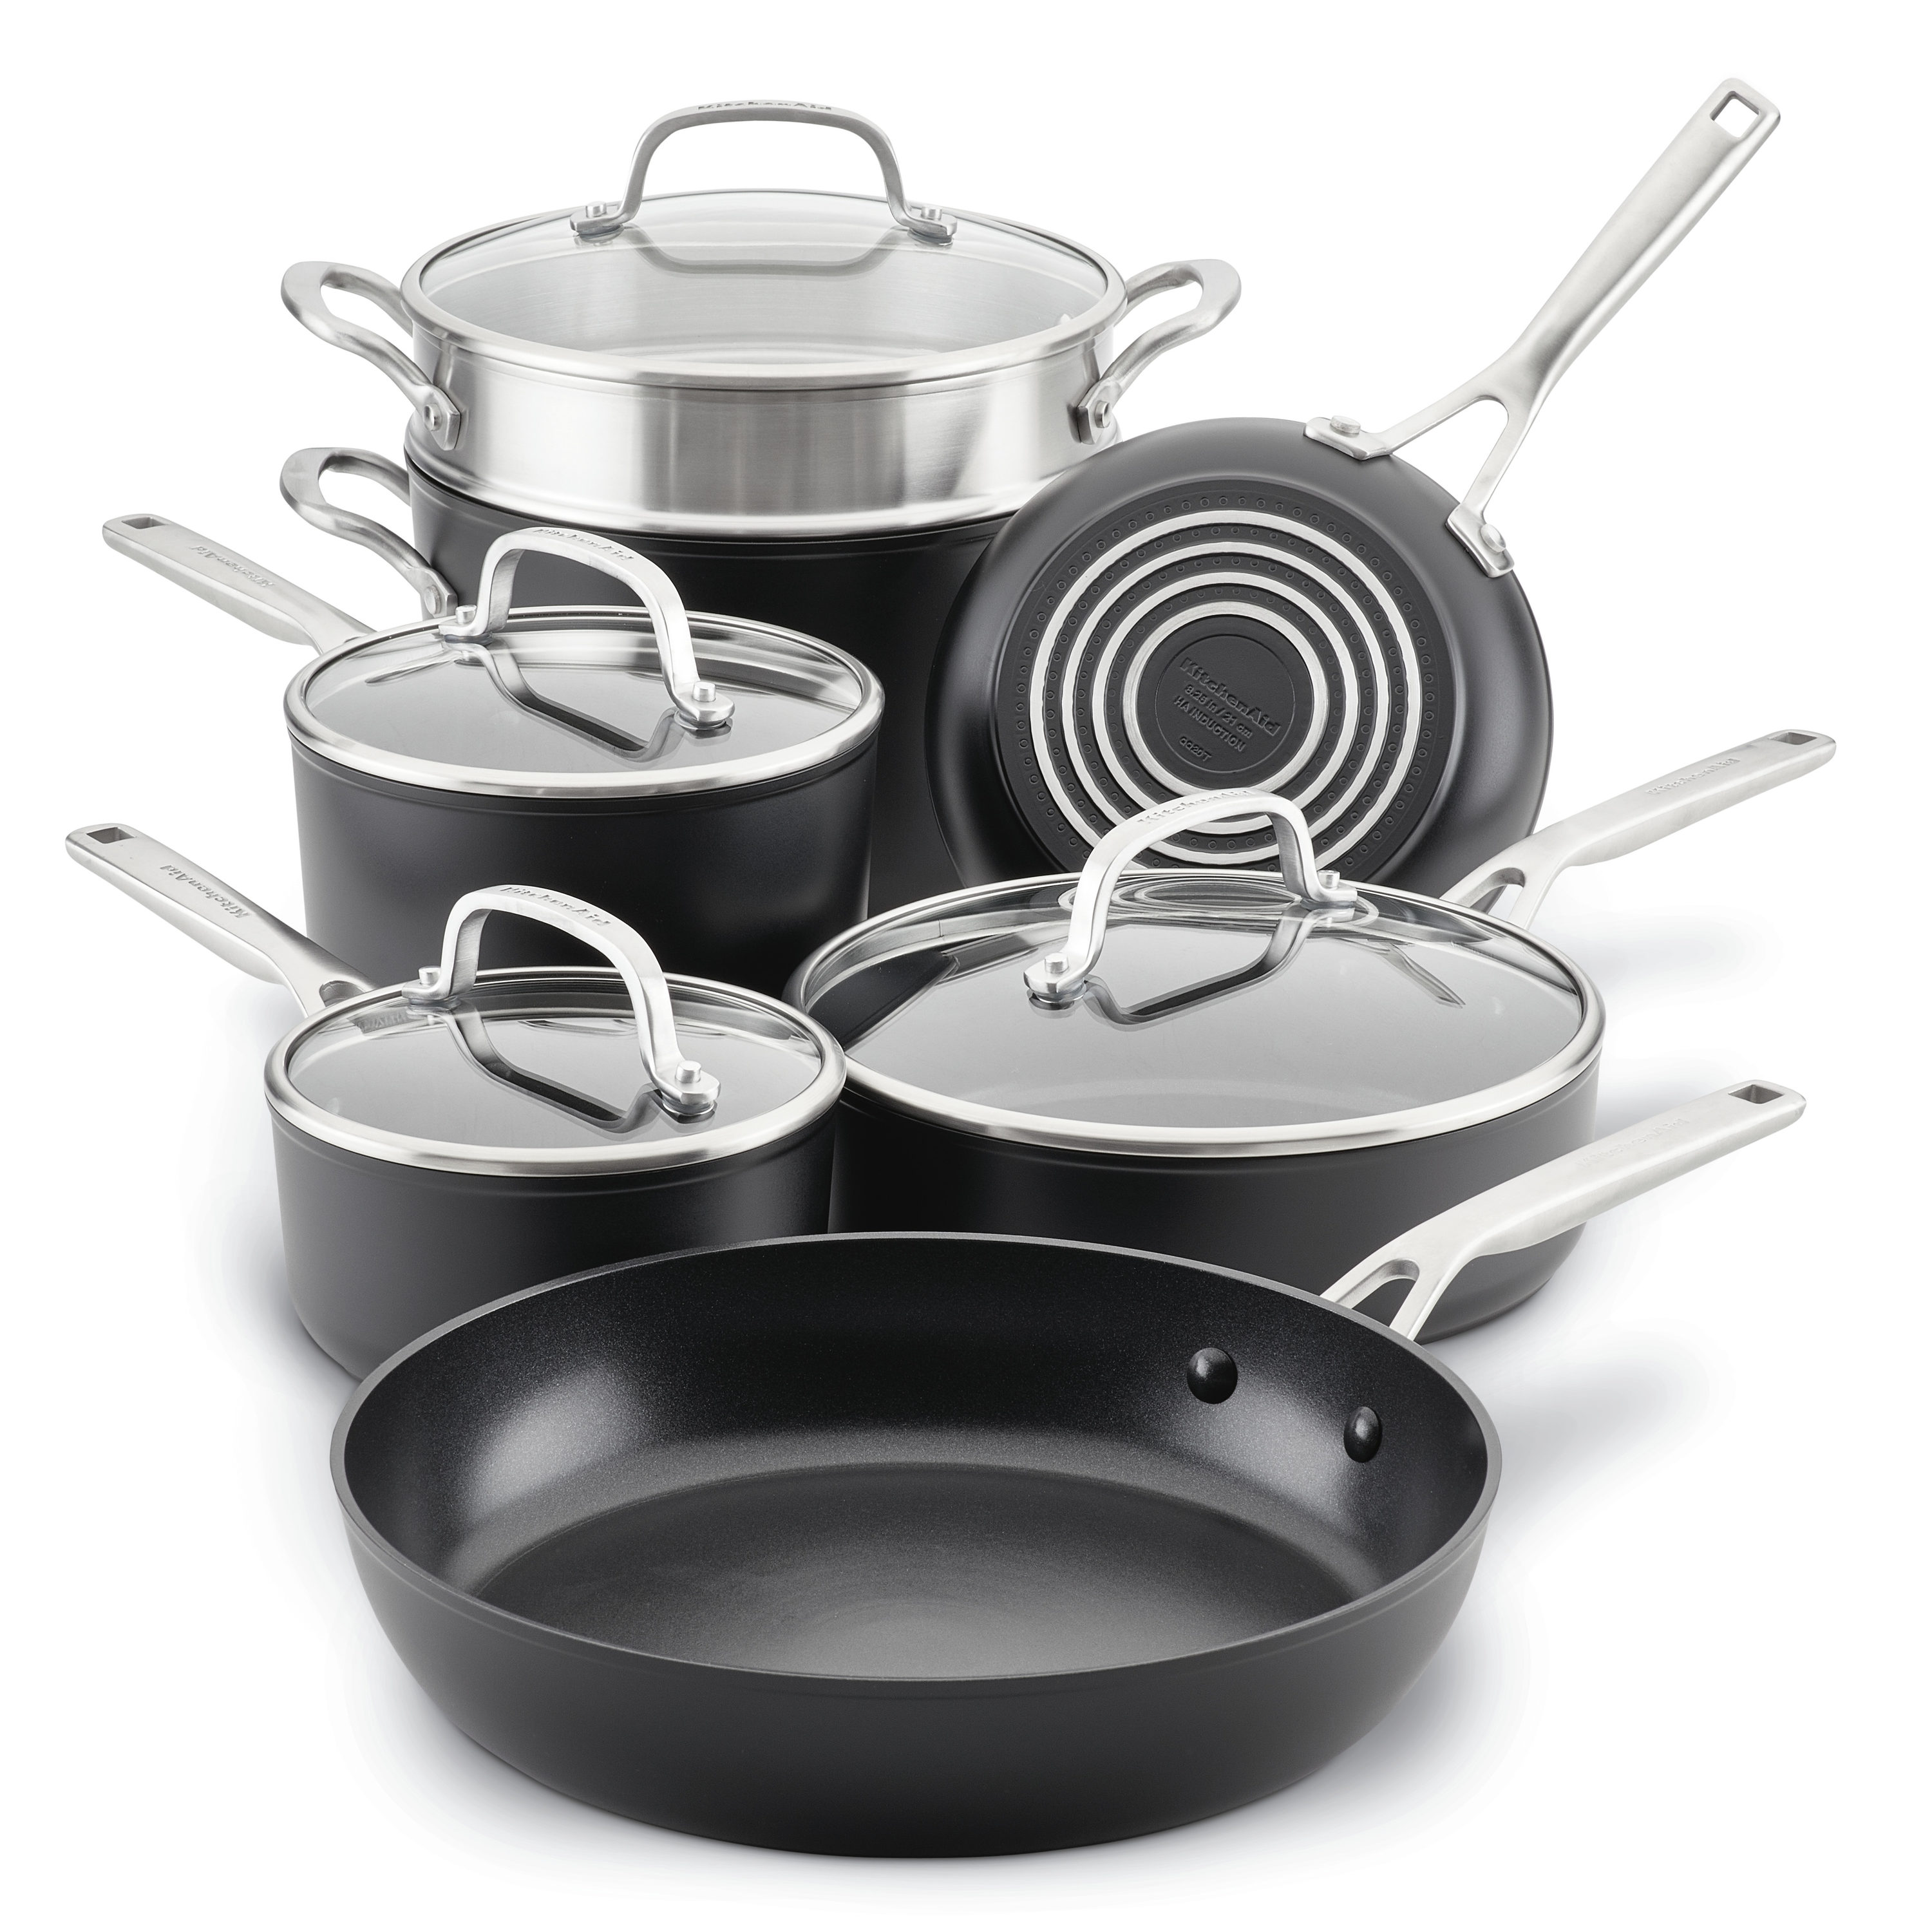 All-Clad cookware: Get this cookware for up to 63% off for a